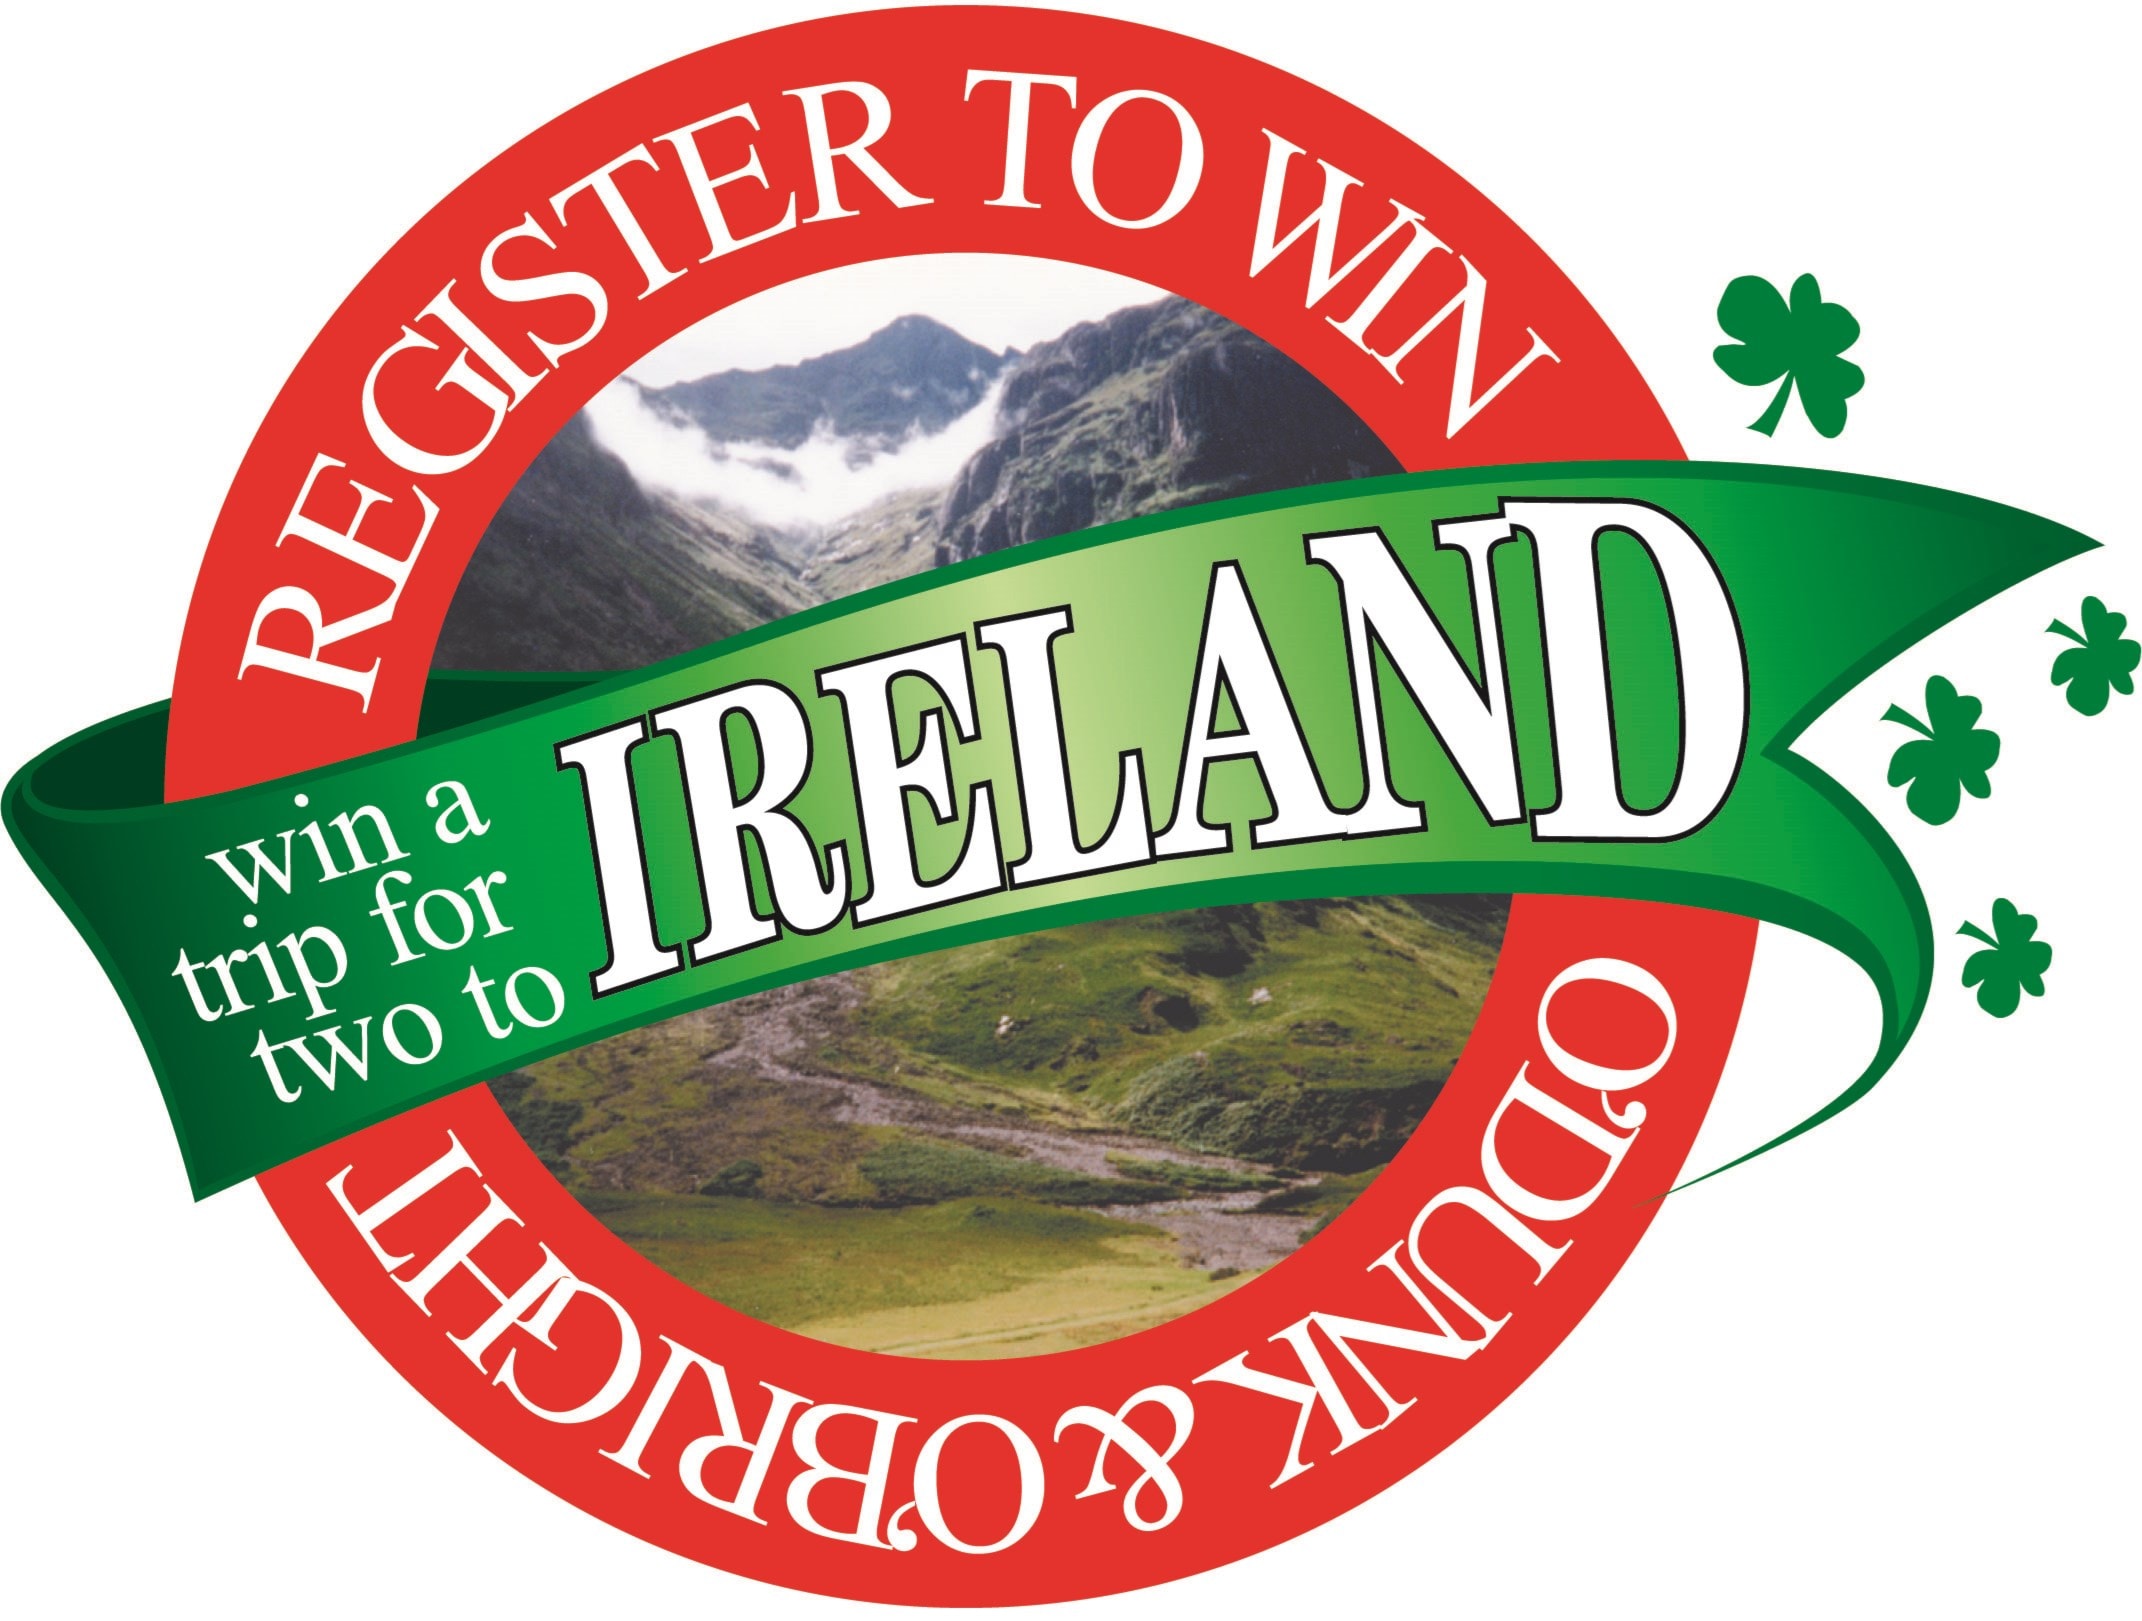 Register to Win! Win a trip to Ireland